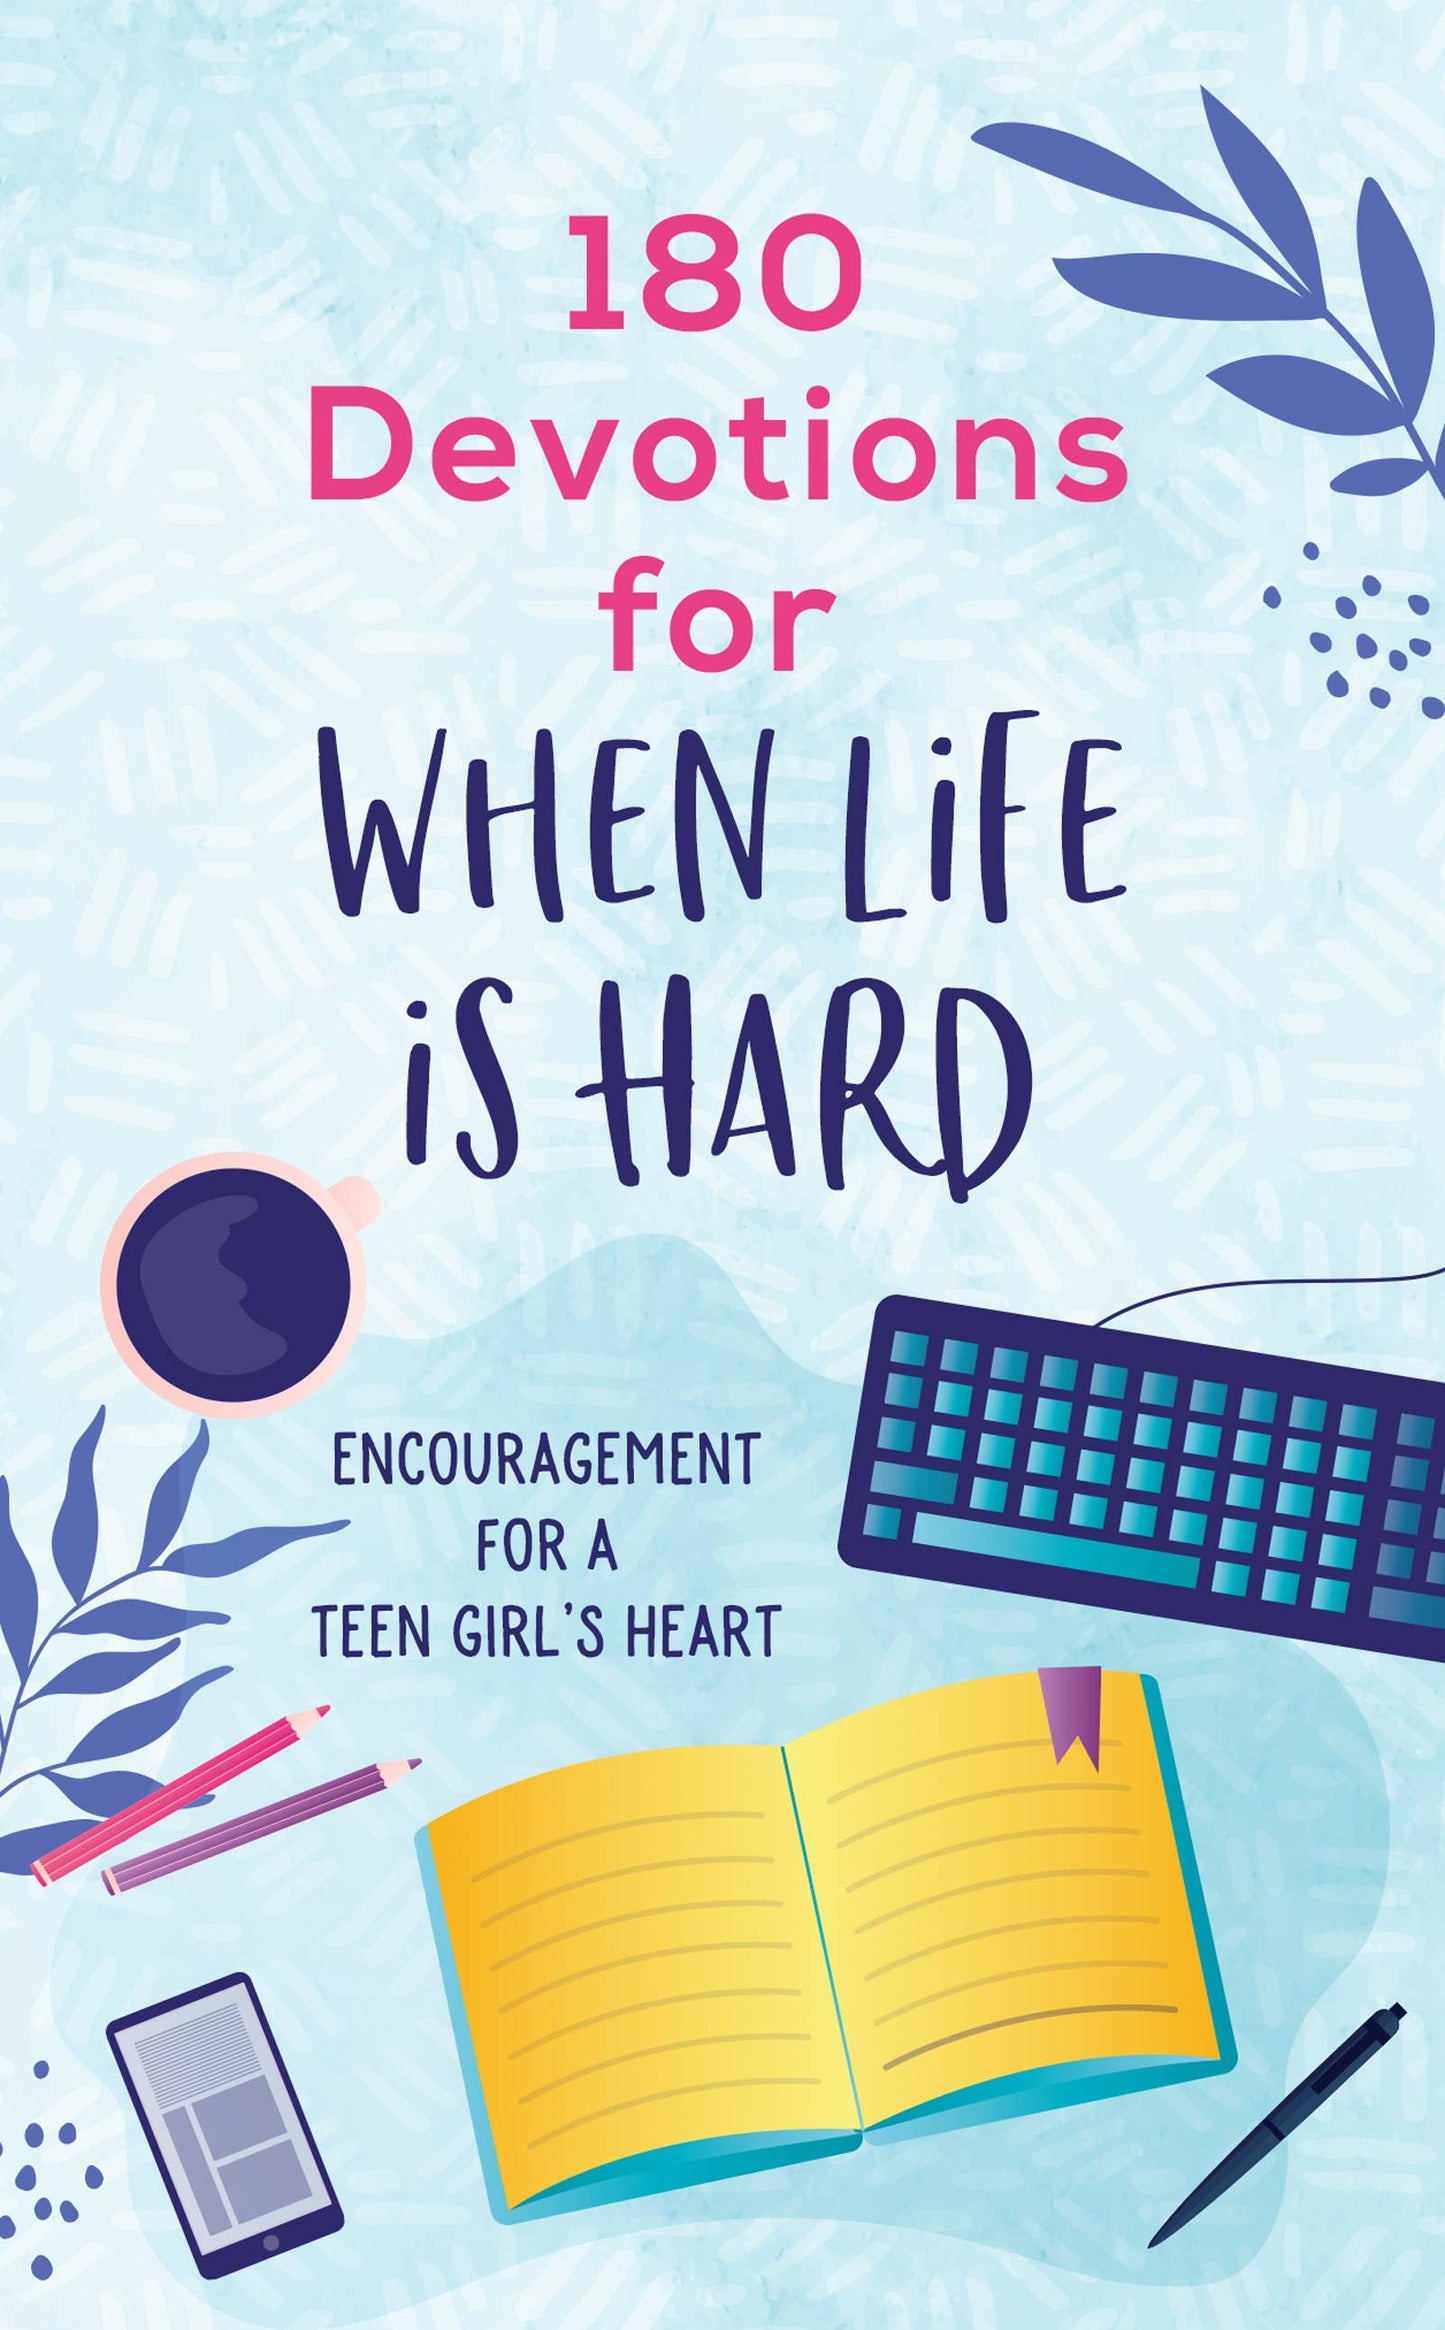 180 Devotions for When Life Is Hard